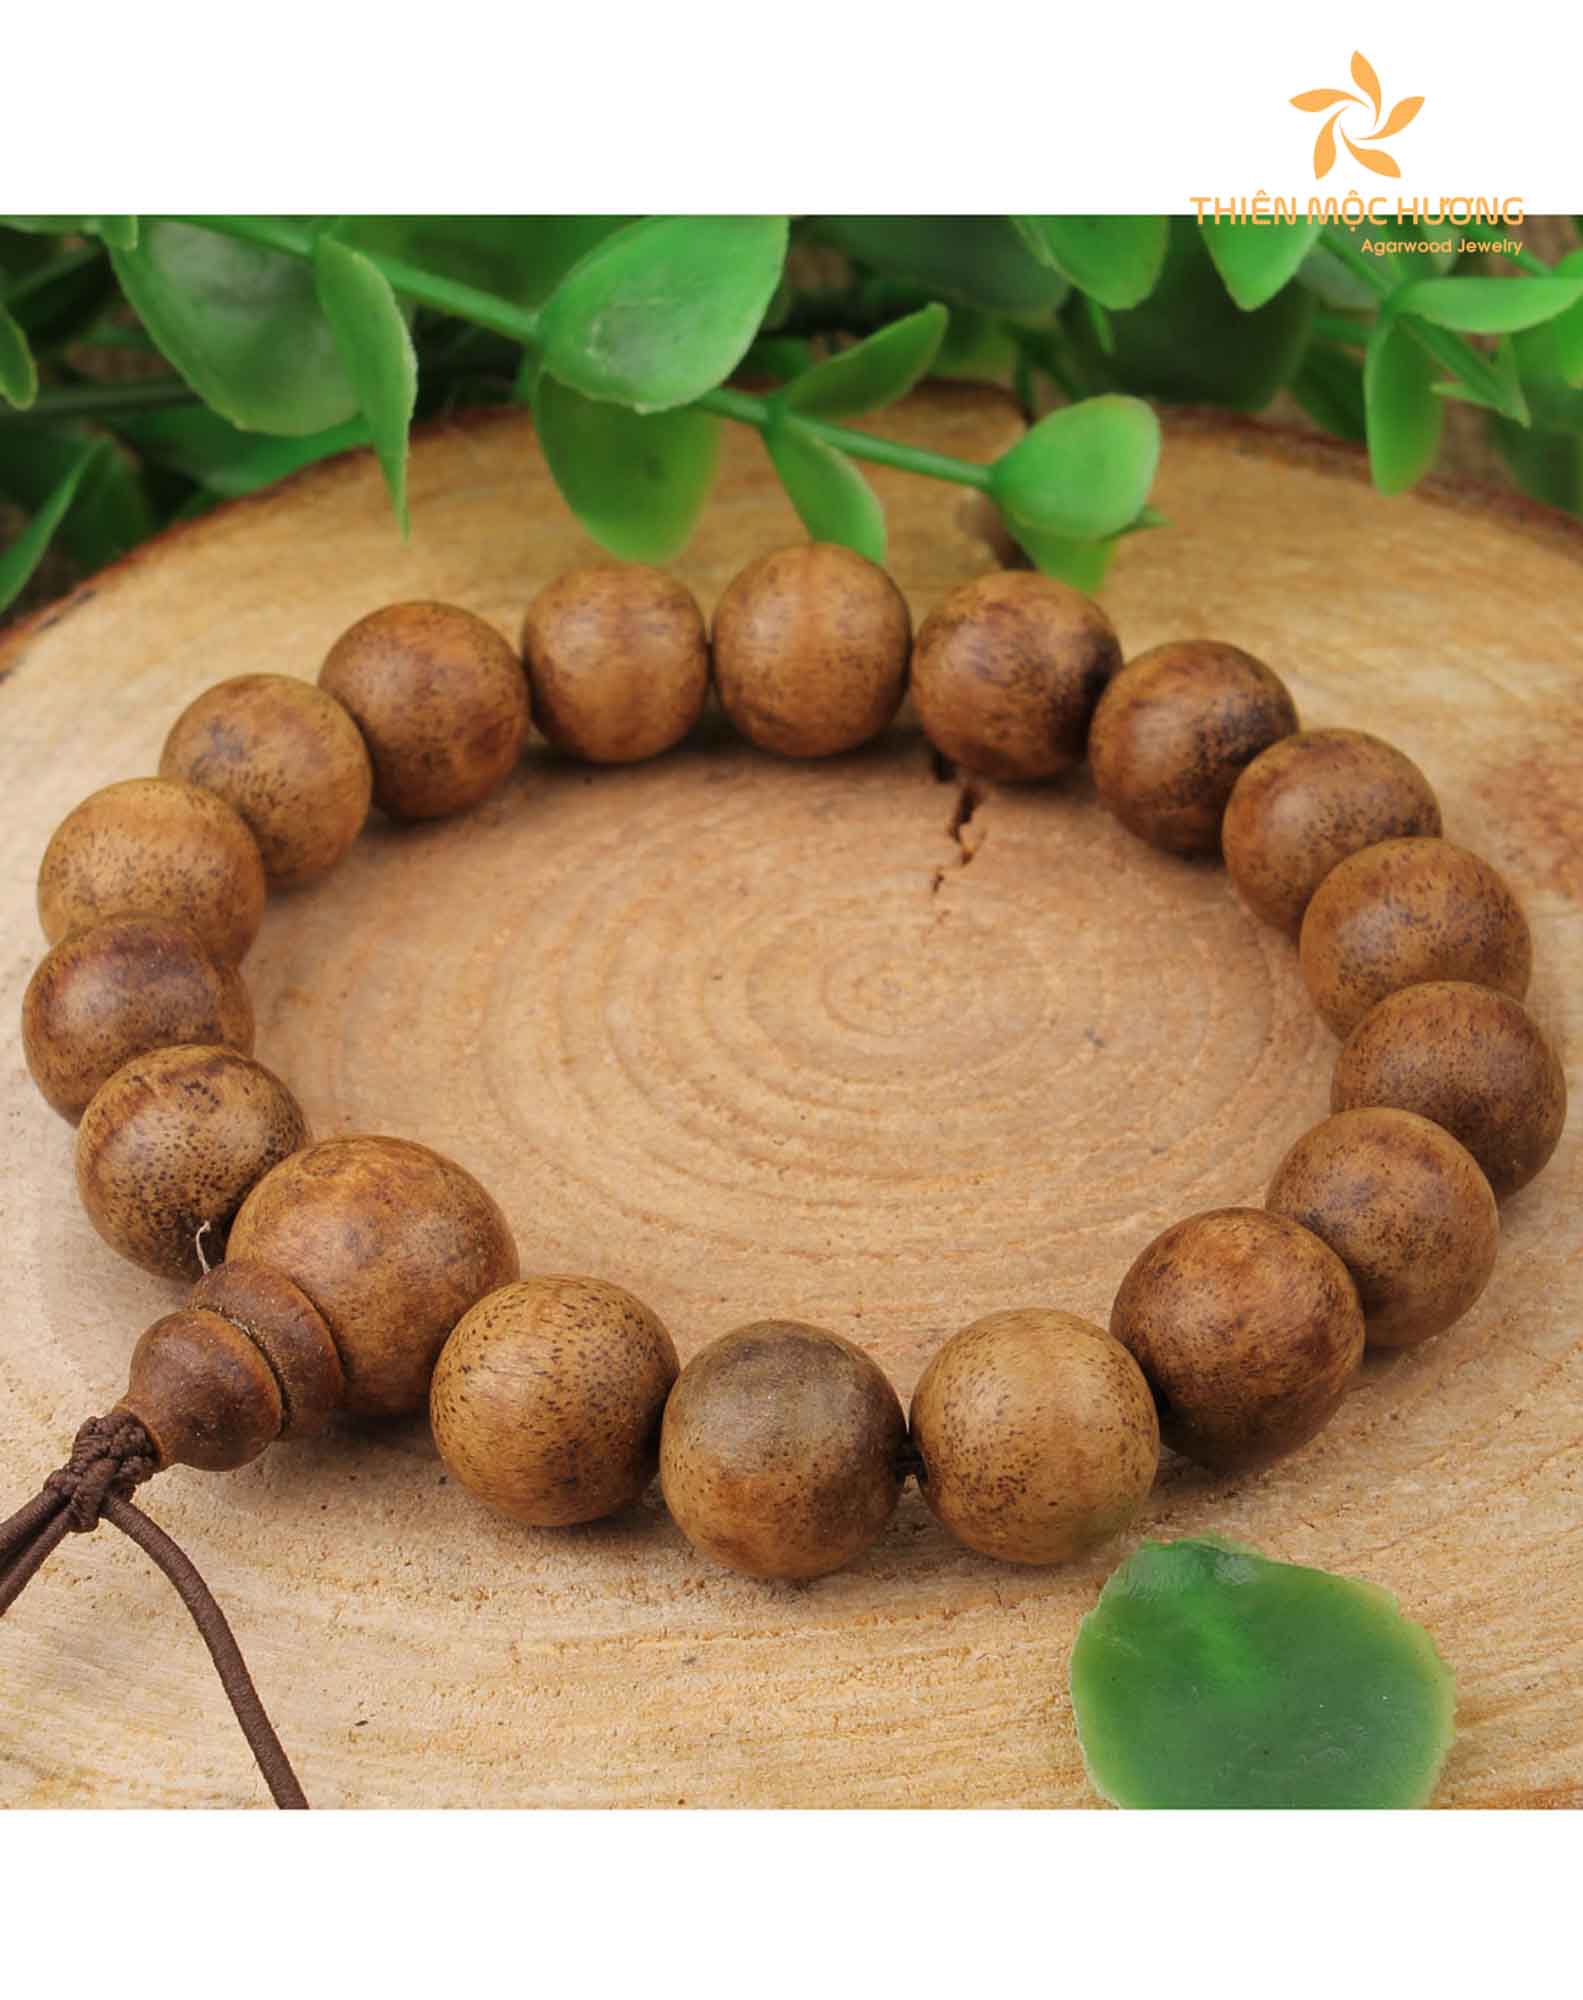 Factors Affecting the Value of Agarwood Bracelets - Medicinal and therapeutic qualities